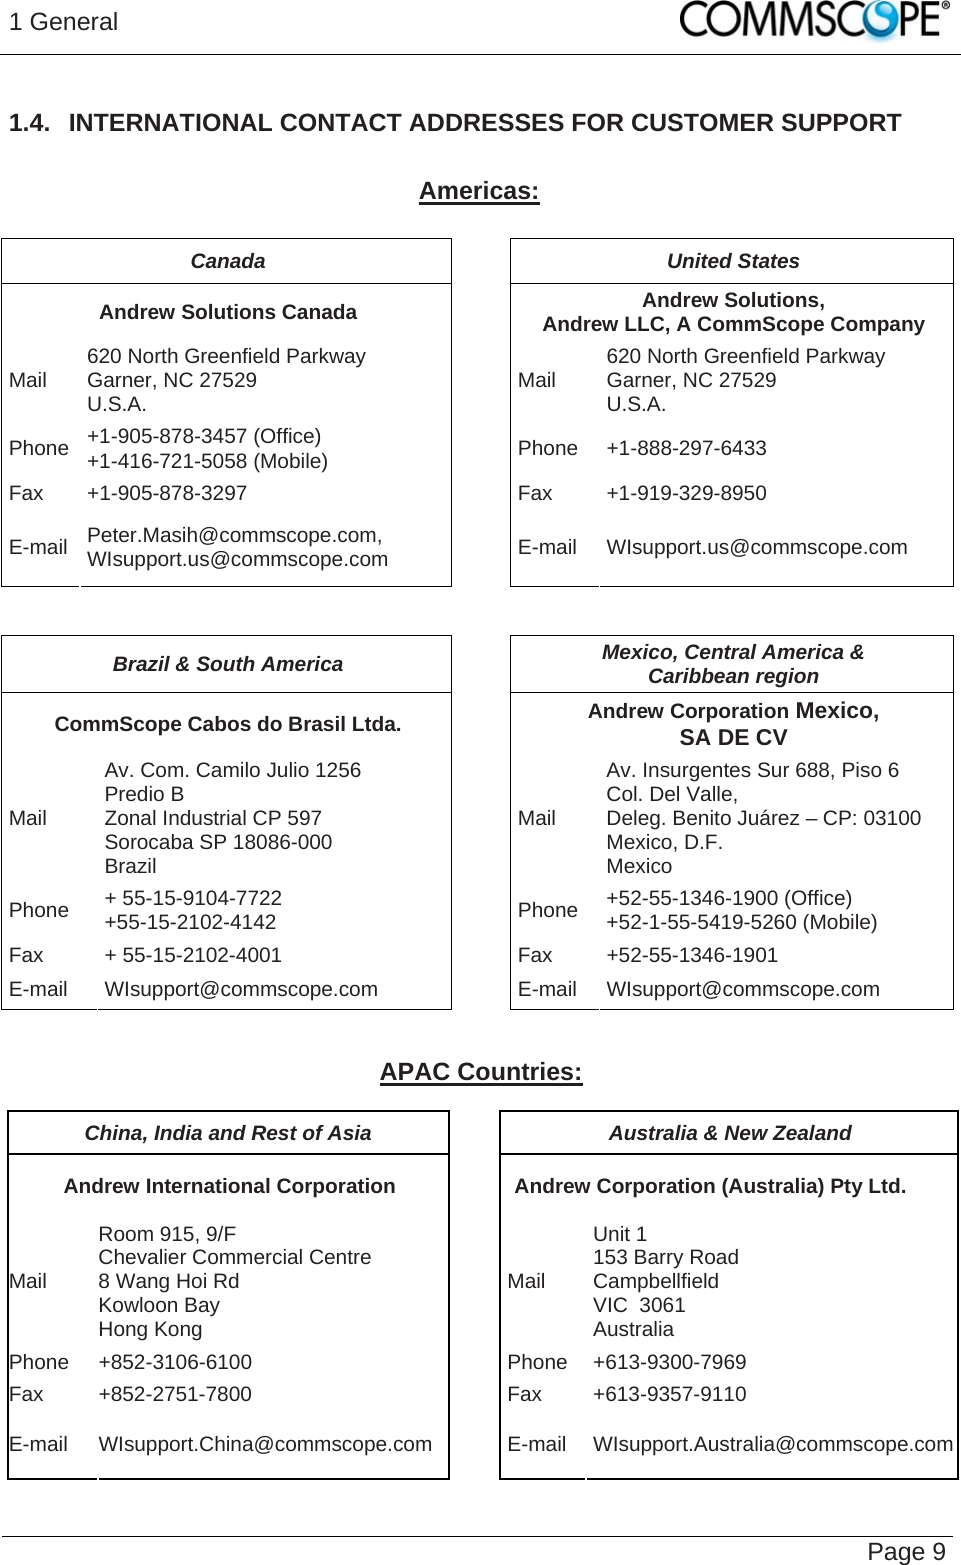 1 General   Page 9 1.4.  INTERNATIONAL CONTACT ADDRESSES FOR CUSTOMER SUPPORT  Americas:  Canada United States Andrew Solutions Canada  Andrew Solutions,  Andrew LLC, A CommScope Company Mail  620 North Greenfield Parkway Garner, NC 27529 U.S.A.  Mail  620 North Greenfield Parkway Garner, NC 27529 U.S.A. Phone  +1-905-878-3457 (Office) +1-416-721-5058 (Mobile) Phone +1-888-297-6433 Fax +1-905-878-3297  Fax  +1-919-329-8950 E-mail  Peter.Masih@commscope.com, WIsupport.us@commscope.com  E-mail WIsupport.us@commscope.com   Brazil &amp; South America  Mexico, Central America &amp;  Caribbean region CommScope Cabos do Brasil Ltda.  Andrew Corporation Mexico,  SA DE CV Mail Av. Com. Camilo Julio 1256 Predio B Zonal Industrial CP 597 Sorocaba SP 18086-000 Brazil Mail Av. Insurgentes Sur 688, Piso 6 Col. Del Valle,  Deleg. Benito Juárez – CP: 03100 Mexico, D.F. Mexico Phone  + 55-15-9104-7722 +55-15-2102-4142  Phone  +52-55-1346-1900 (Office) +52-1-55-5419-5260 (Mobile) Fax + 55-15-2102-4001  Fax +52-55-1346-1901 E-mail WIsupport@commscope.com  E-mail WIsupport@commscope.com   APAC Countries:  China, India and Rest of Asia  Australia &amp; New Zealand Andrew International Corporation  Andrew Corporation (Australia) Pty Ltd. Mail Room 915, 9/F  Chevalier Commercial Centre 8 Wang Hoi Rd Kowloon Bay  Hong Kong Mail Unit 1 153 Barry Road Campbellfield  VIC  3061 Australia Phone +852-3106-6100  Phone +613-9300-7969 Fax +852-2751-7800  Fax +613-9357-9110 E-mail WIsupport.China@commscope.com  E-mail WIsupport.Australia@commscope.com 